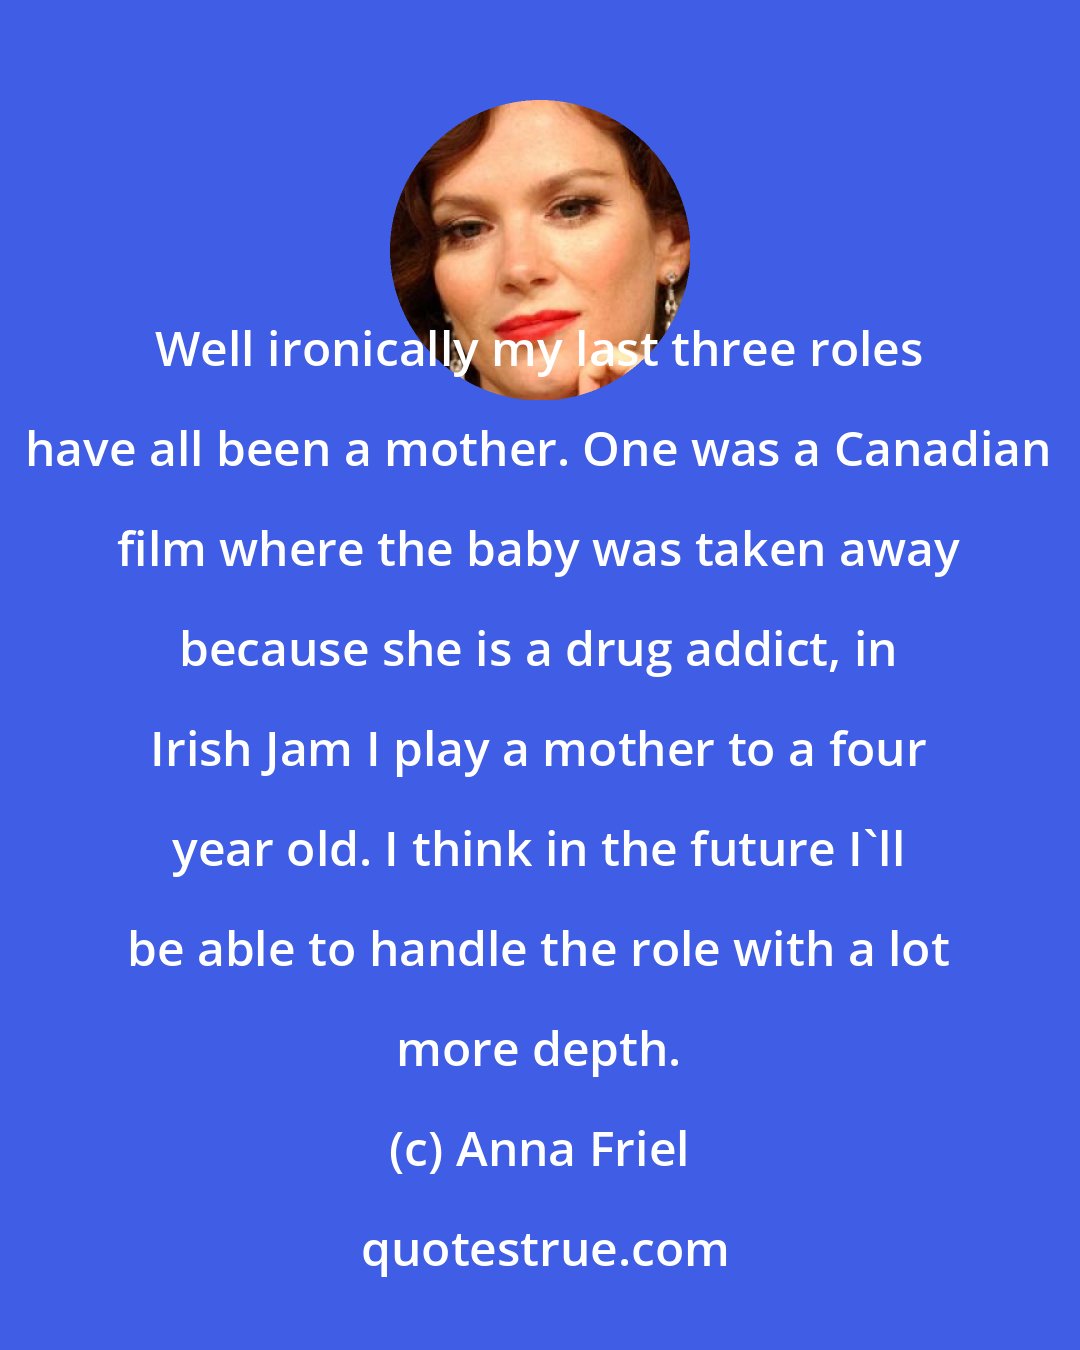 Anna Friel: Well ironically my last three roles have all been a mother. One was a Canadian film where the baby was taken away because she is a drug addict, in Irish Jam I play a mother to a four year old. I think in the future I'll be able to handle the role with a lot more depth.